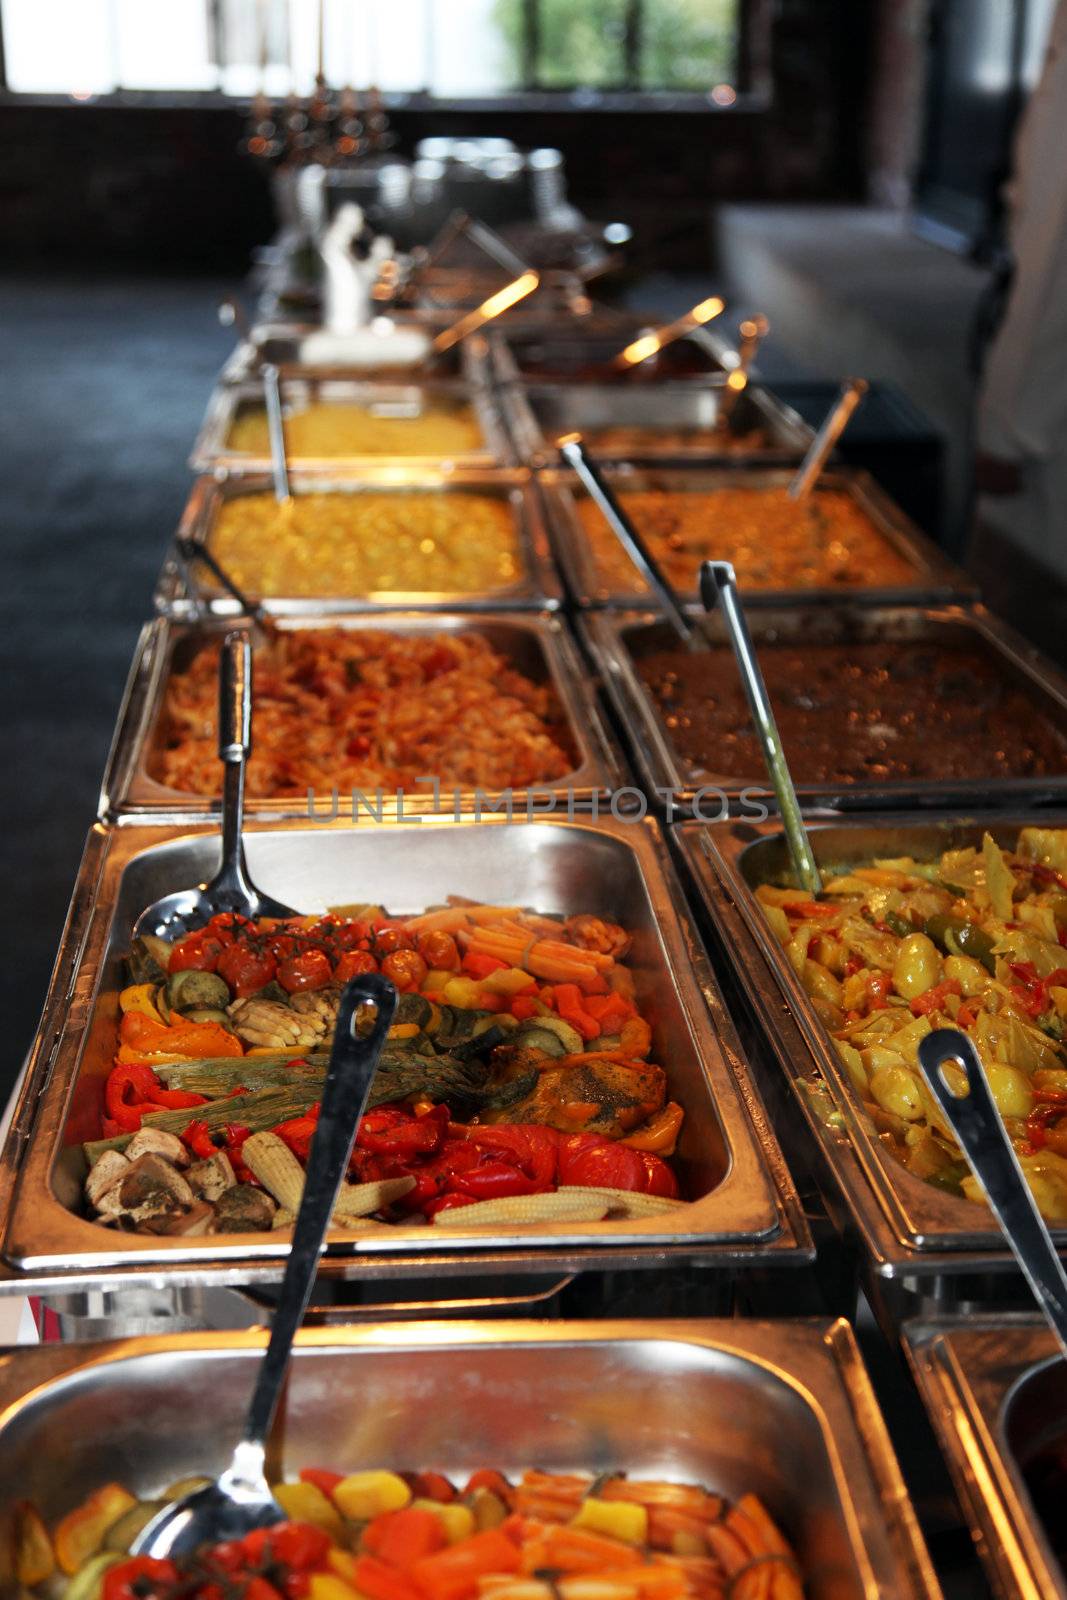 Long row of hot vegetables in stainless steel containers on a catered buffet at a wedding reception or function